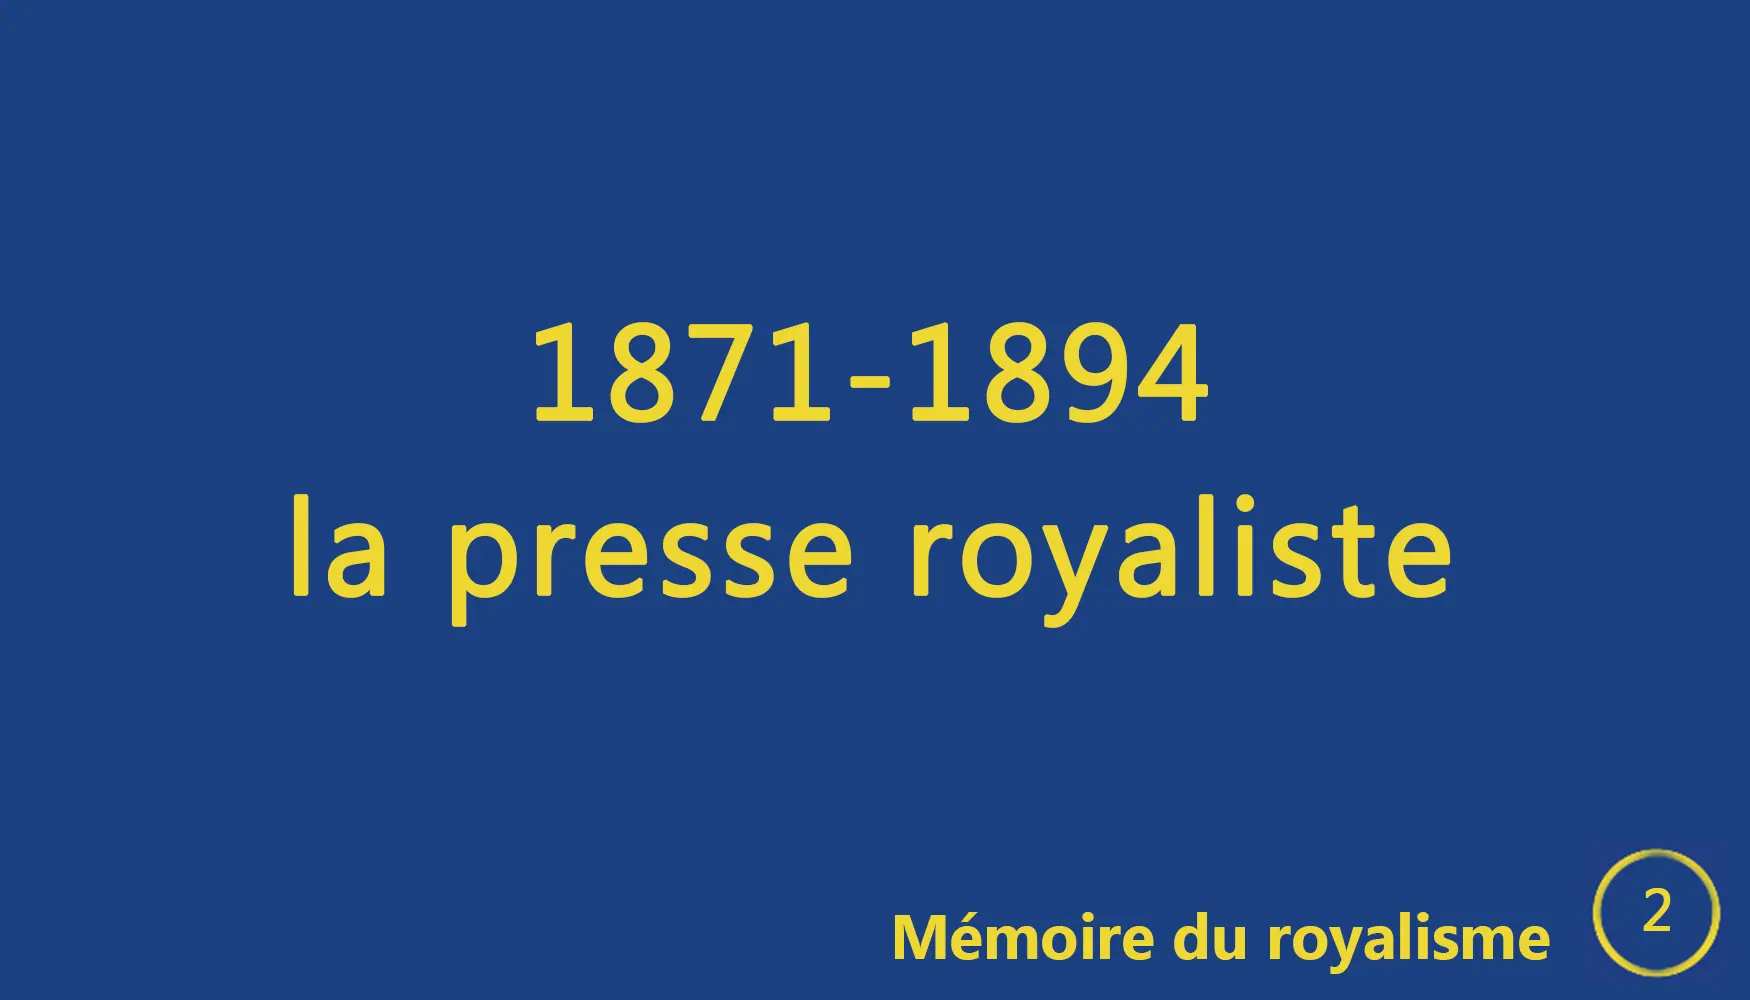 You are currently viewing Mémoire du royalisme 2